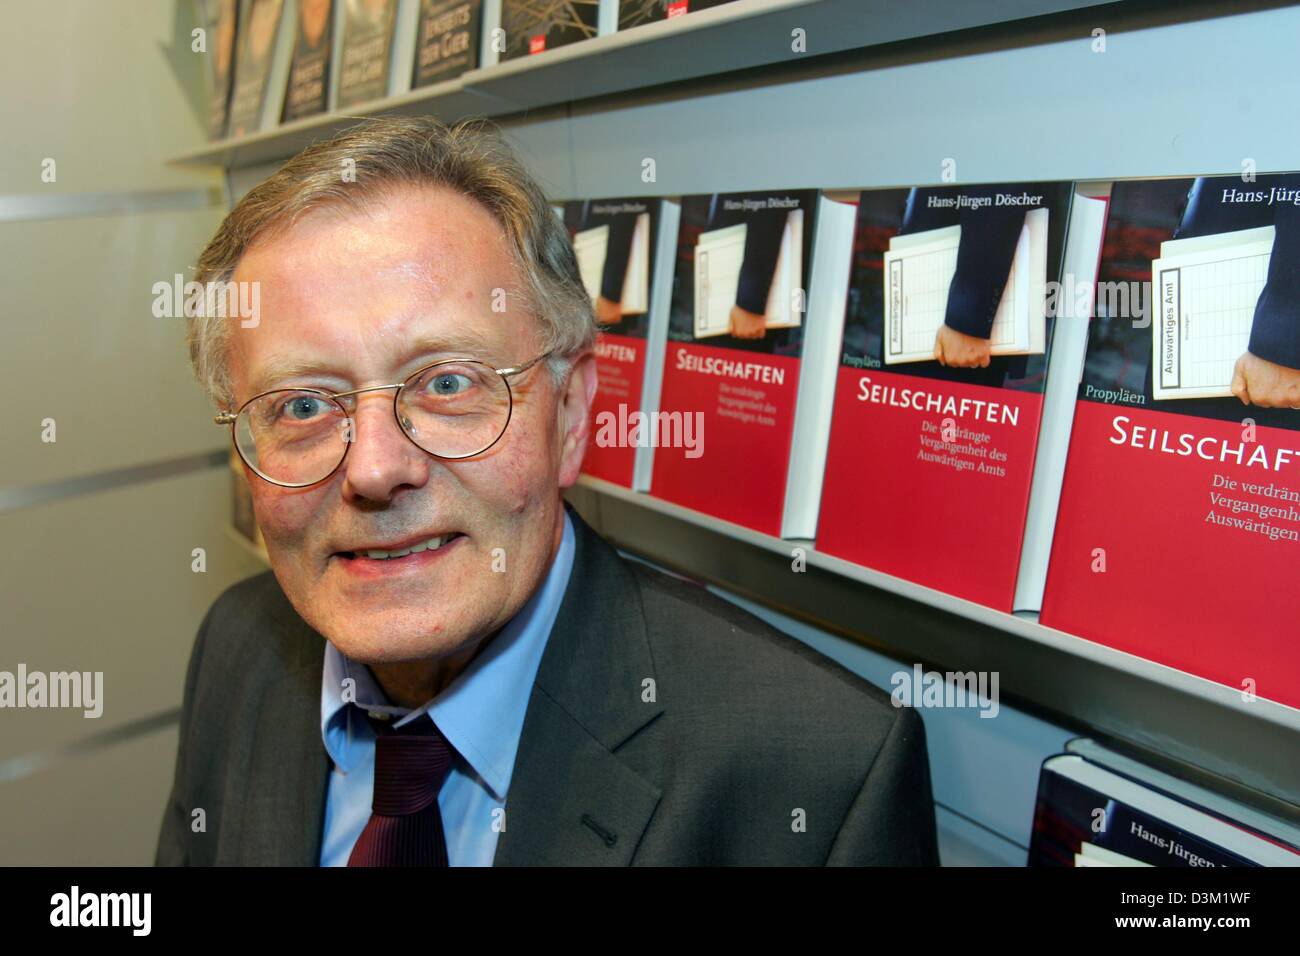 (dpa) - Historian and author Hans-<b>Juergen Doescher</b> pictured at the Frankfurt ... - dpa-historian-and-author-hans-juergen-doescher-pictured-at-the-frankfurt-D3M1WF